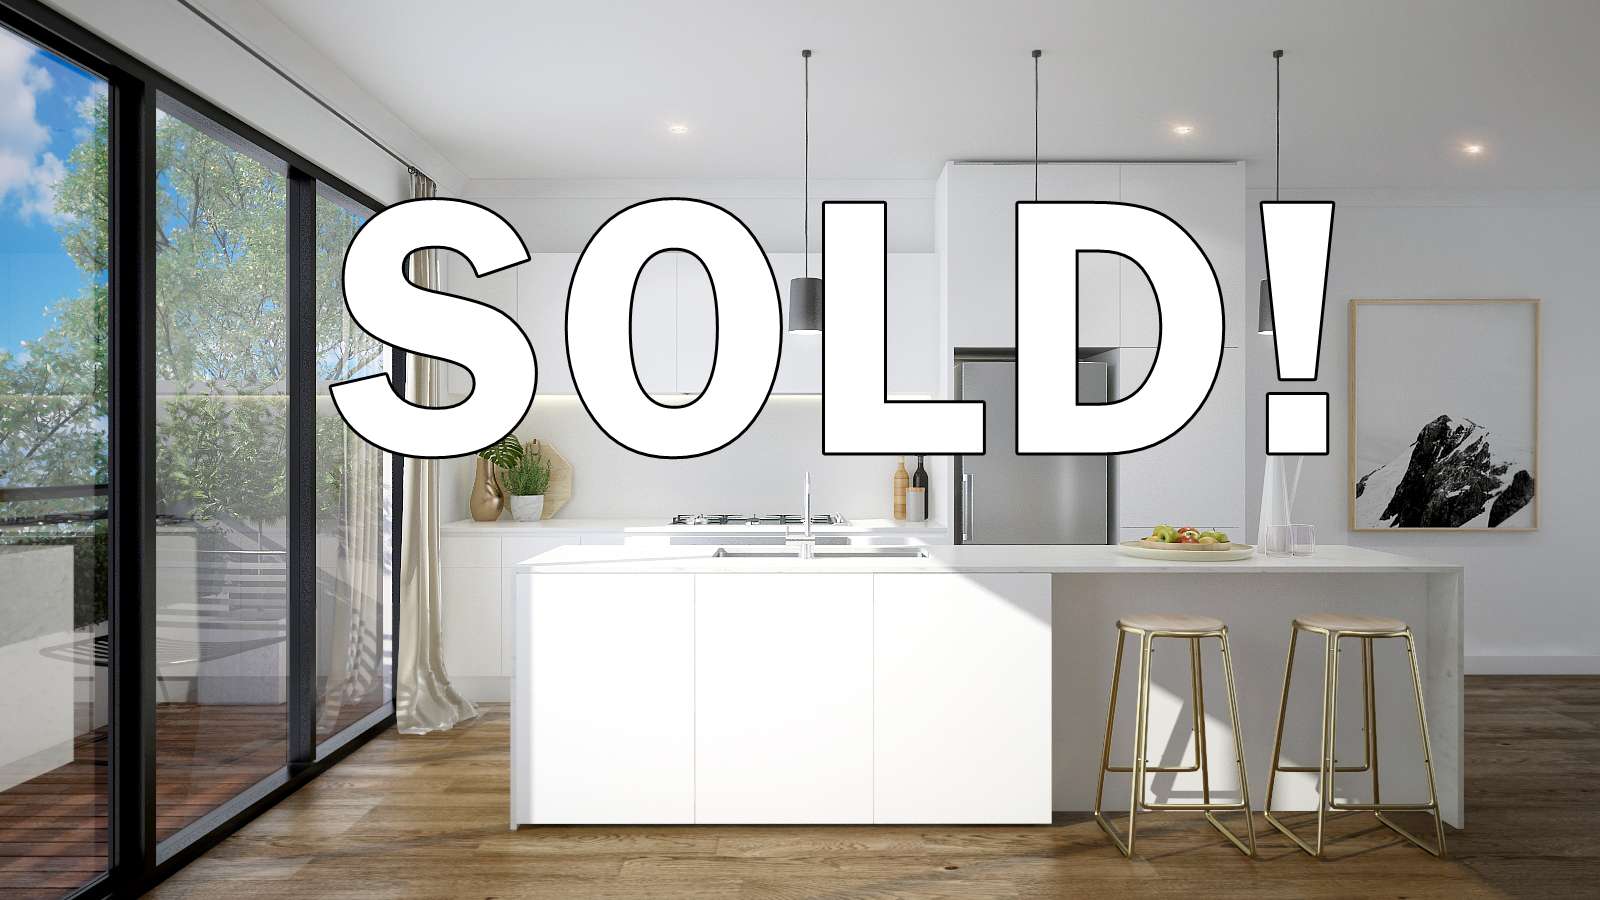 SOLD! over a kitchen picture